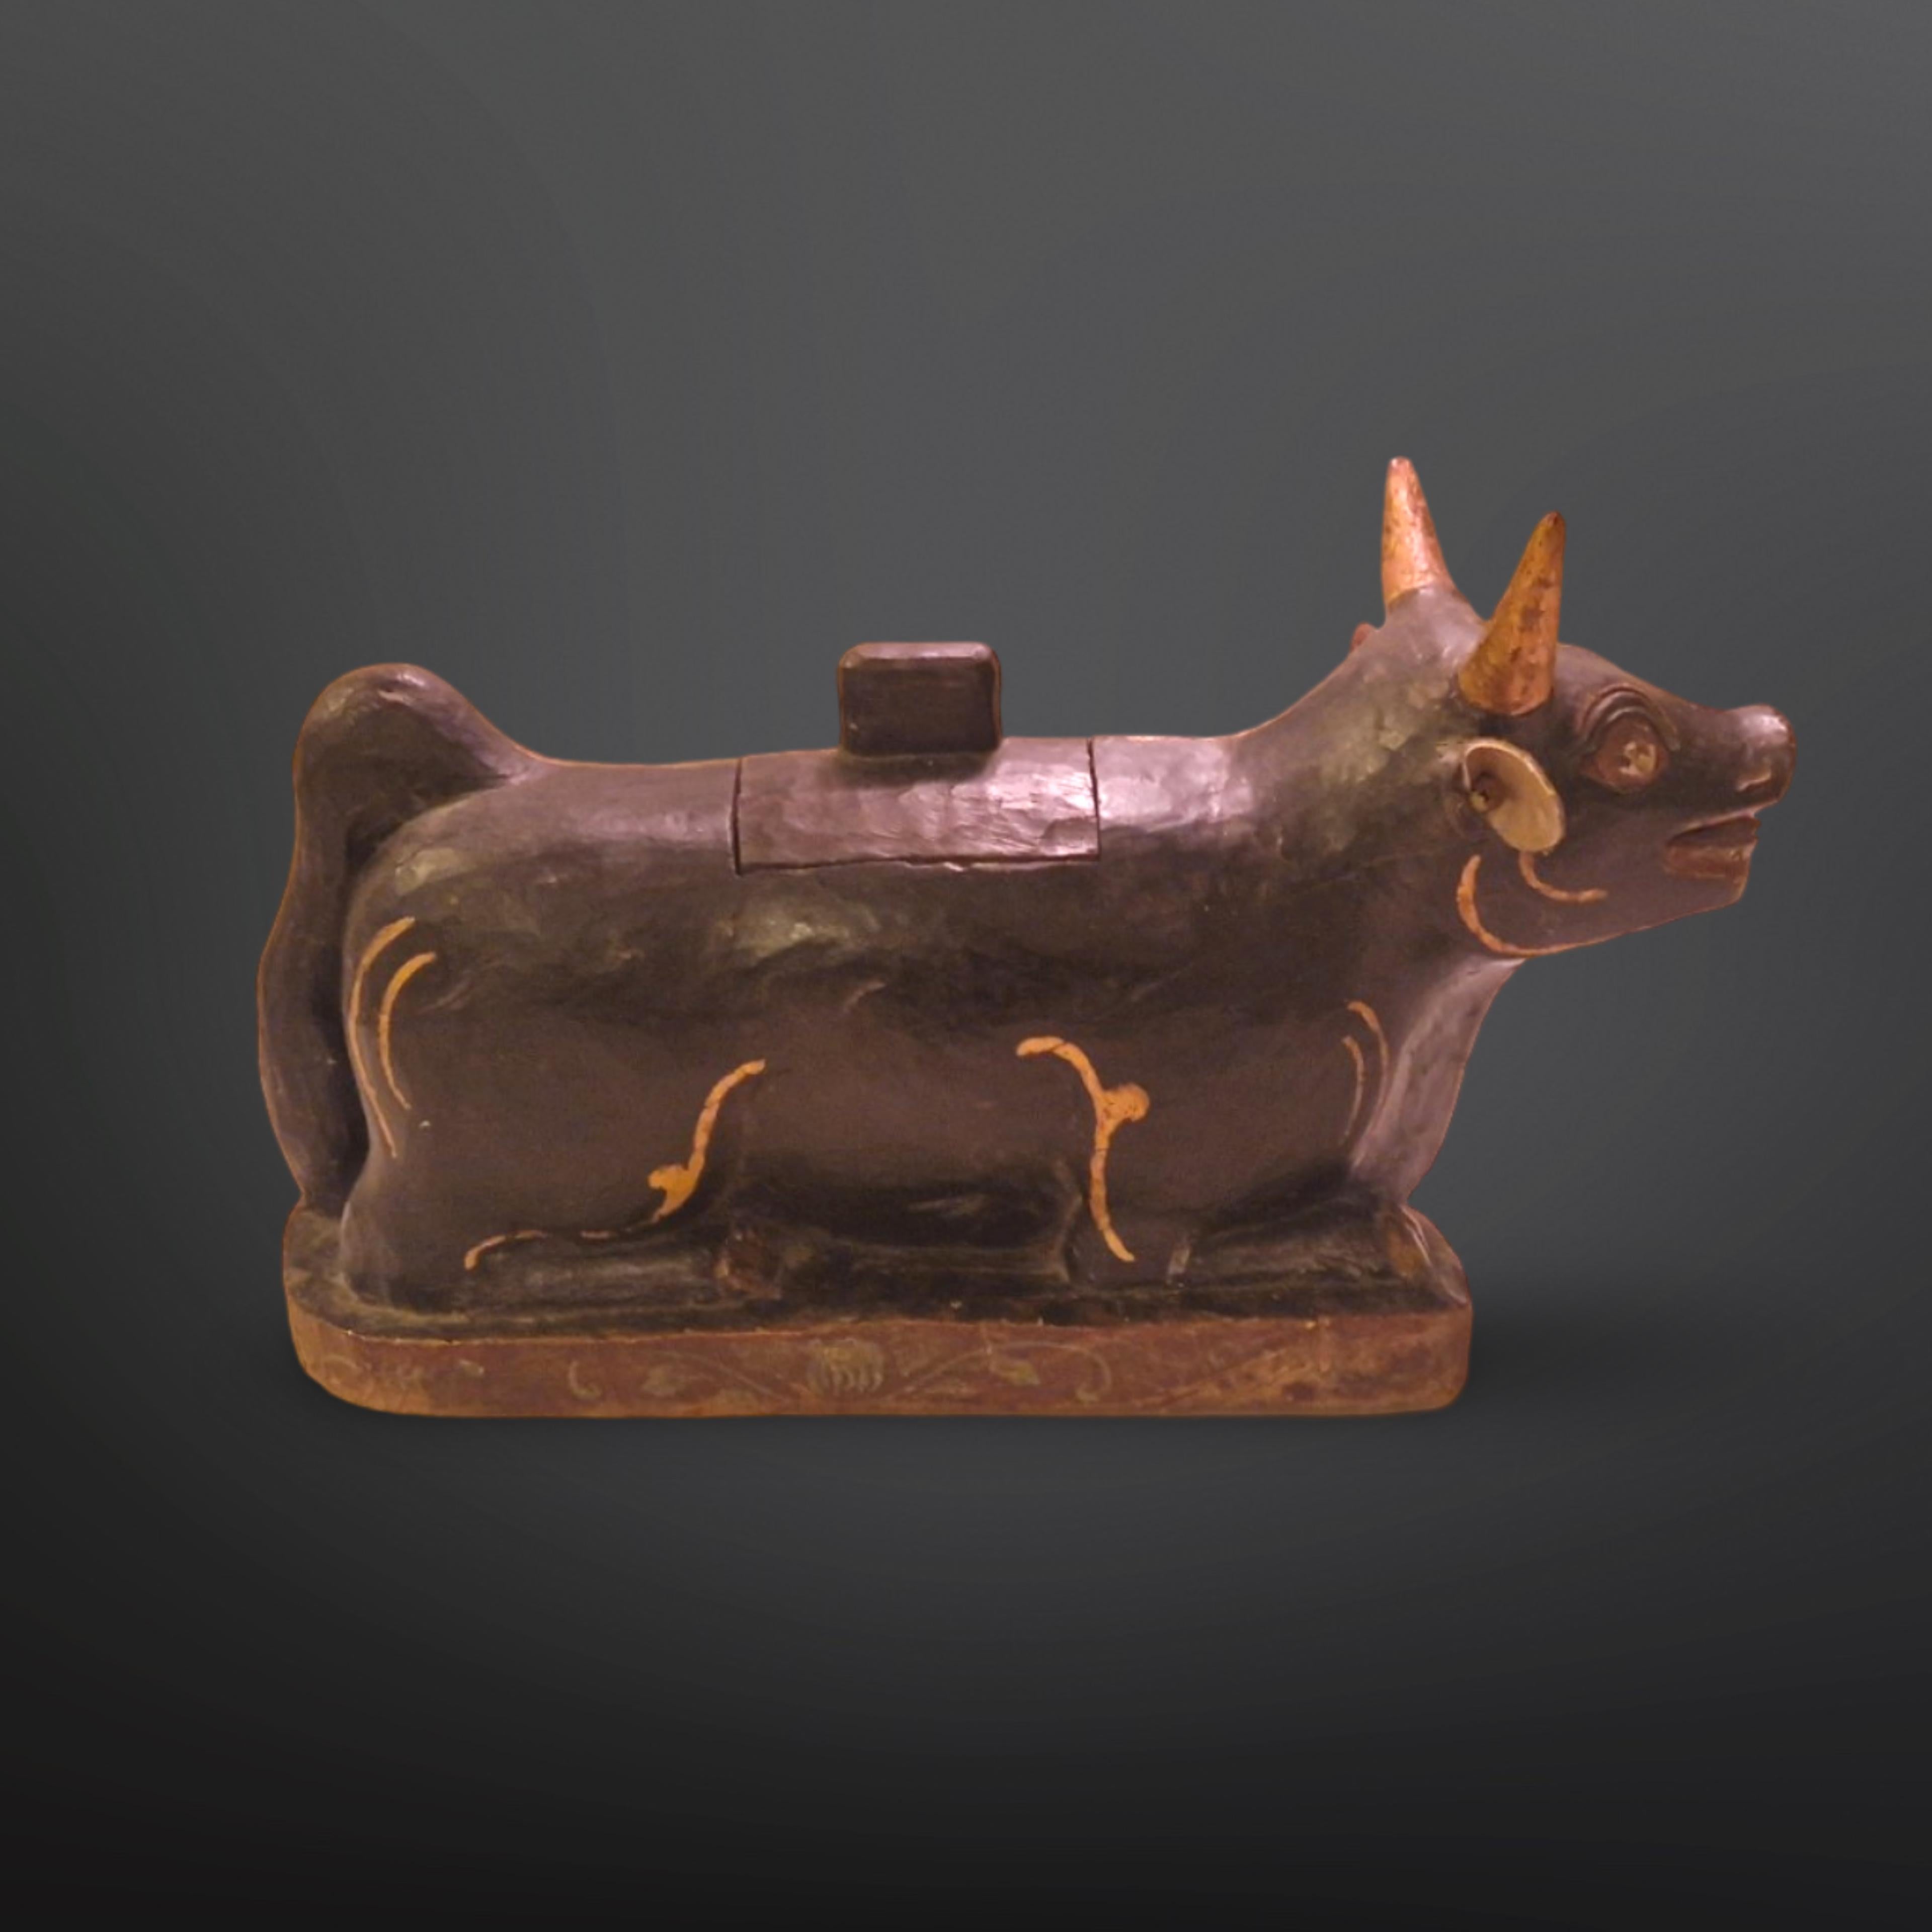 Hand carved and hand painted wood Nandi bull statue. Made around the turn of the 20th century in India. It depicts Vahana, the bull of hindu god Shiva. The statue has a small compartment with a lid on its back. This was probably meant to store an